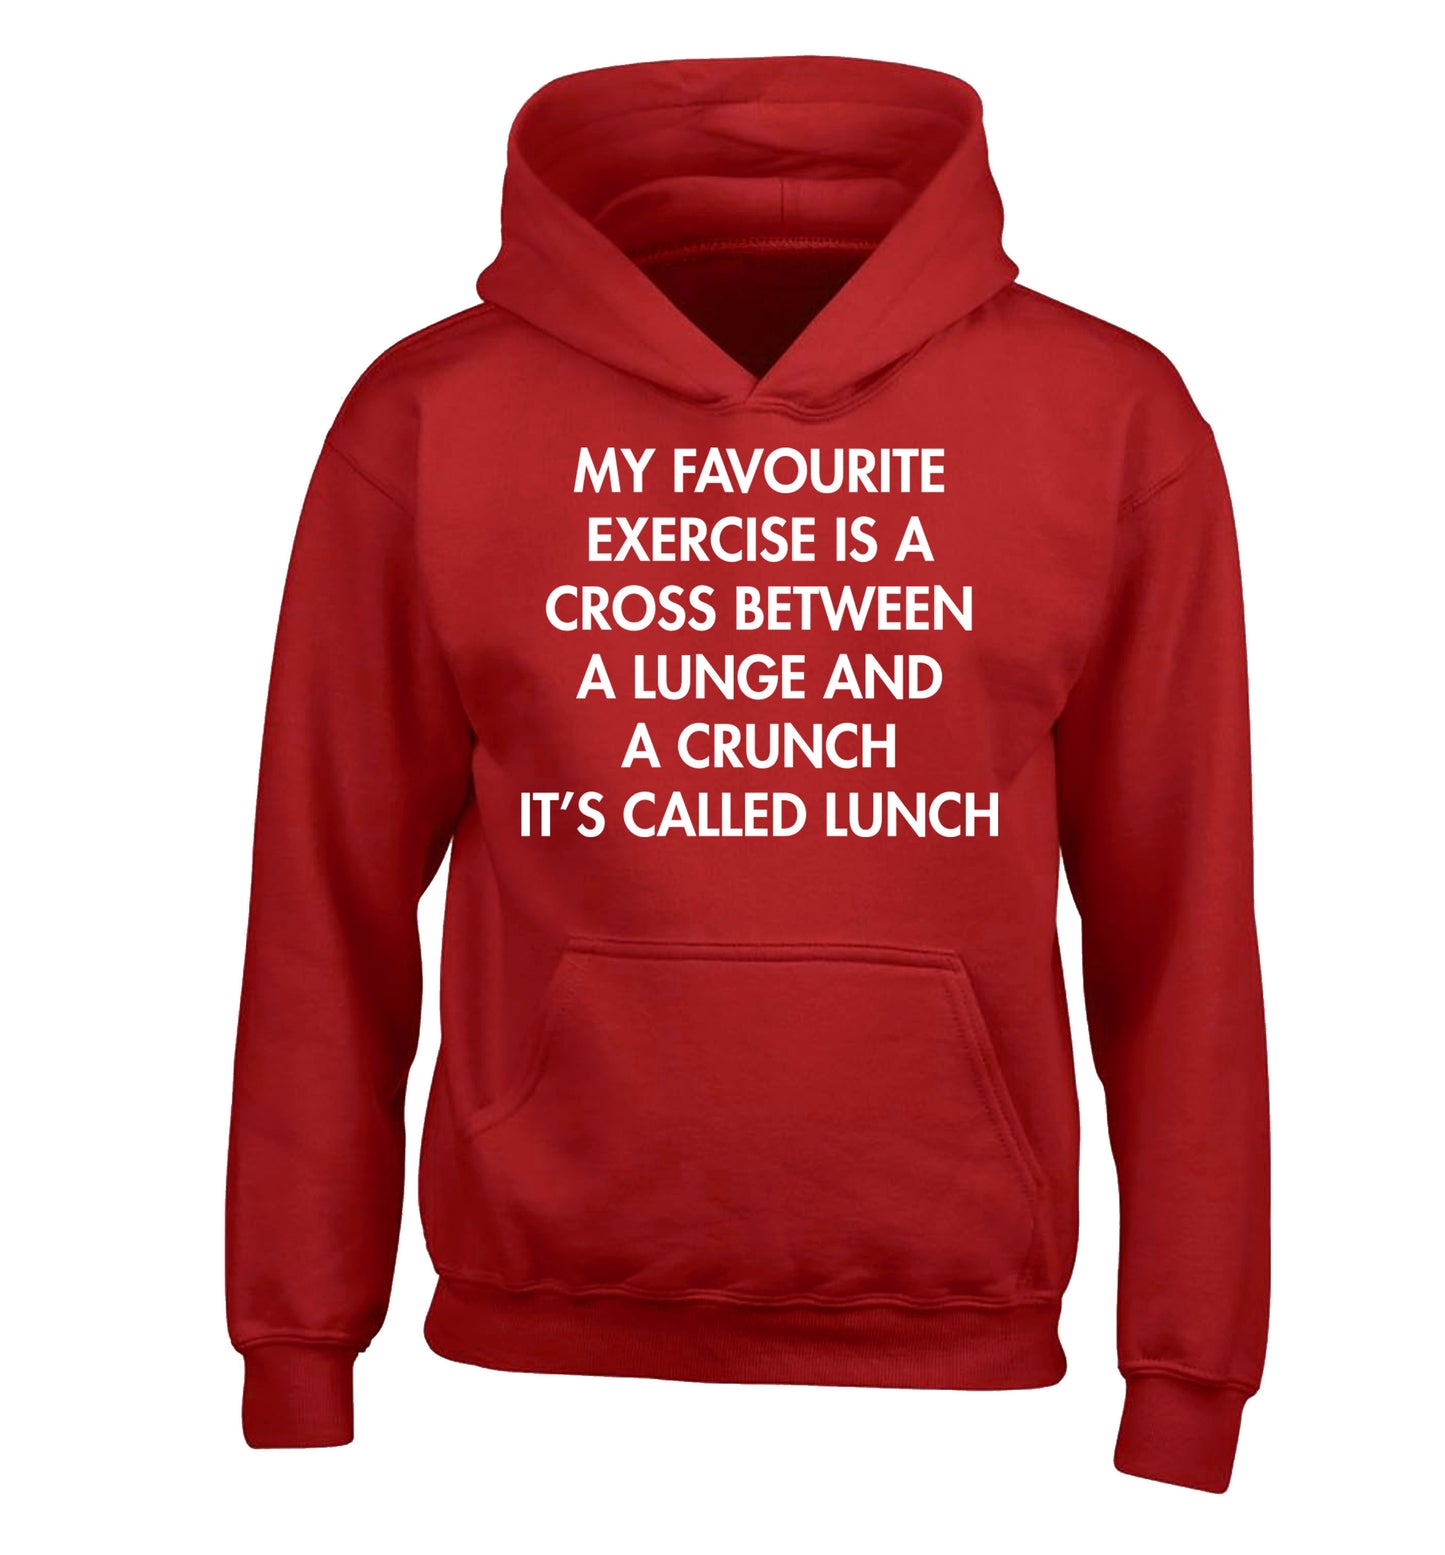 My favourite exercise is a cross between a lung and a crunch it's called lunch children's red hoodie 12-14 Years